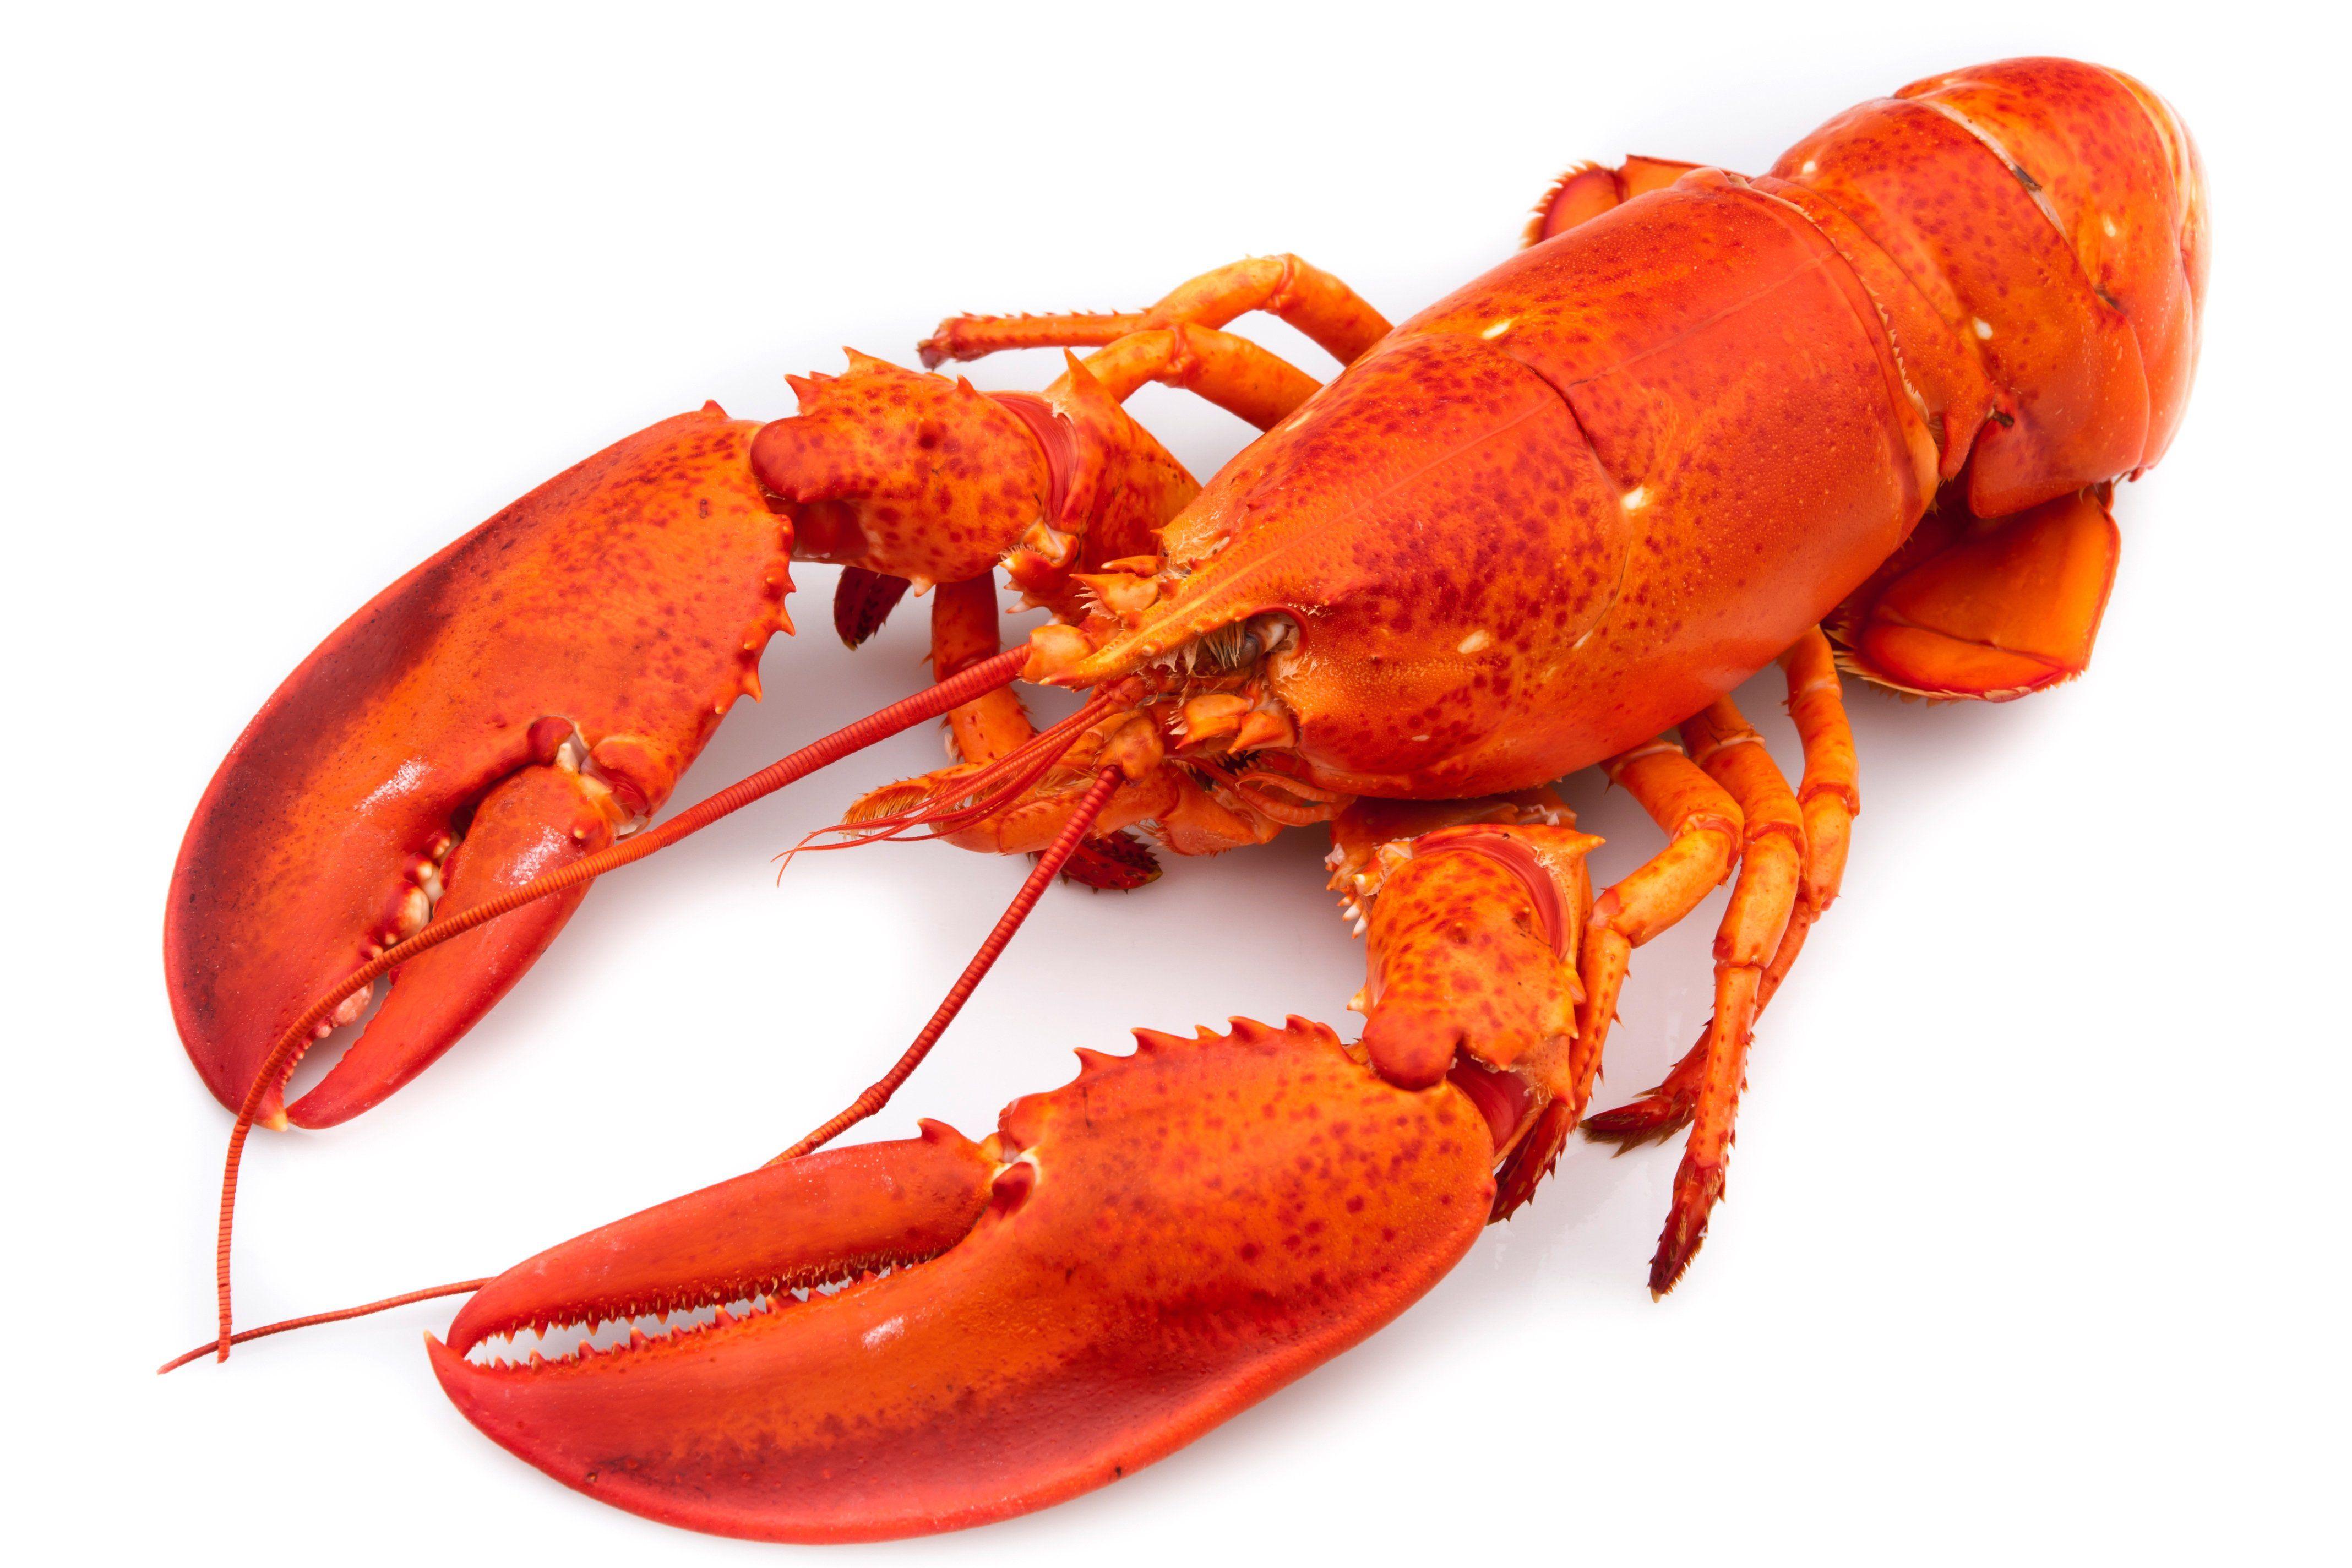 In Gallery: 44 Lobster HD Wallpaper. Background, BsnSCB Gallery